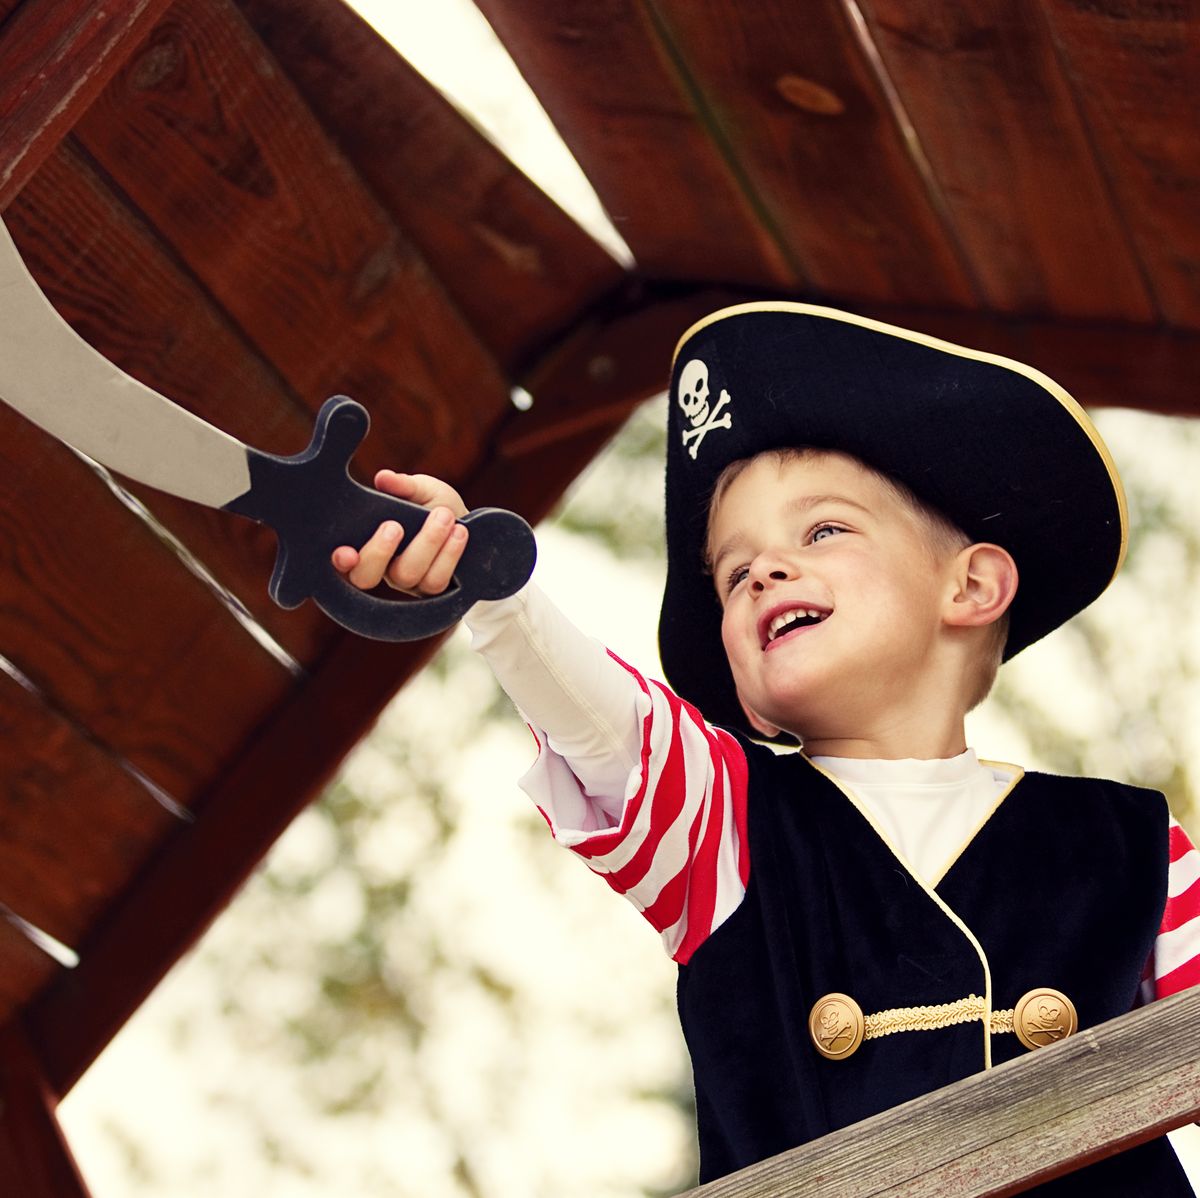 Pirate Costume DIY with Regular Clothes - Moneywise Moms - Easy